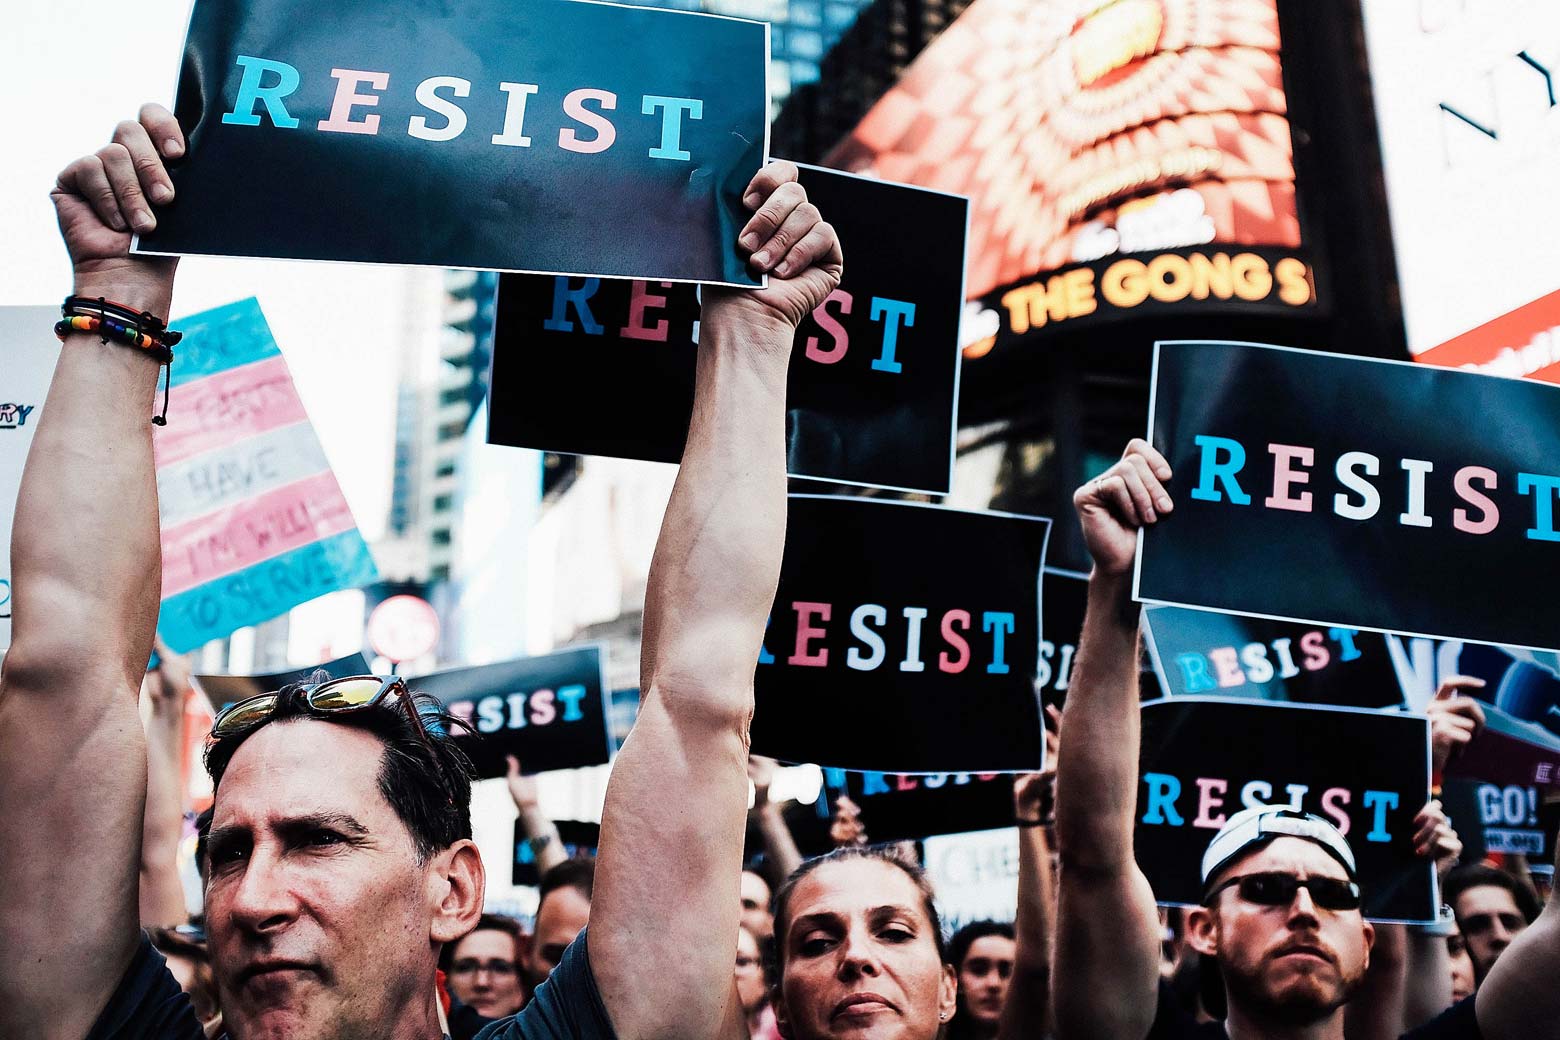 Protesters hold up signs that say, "RESIST" with letters in the blue, white, and pink colors of the transgender symbol.